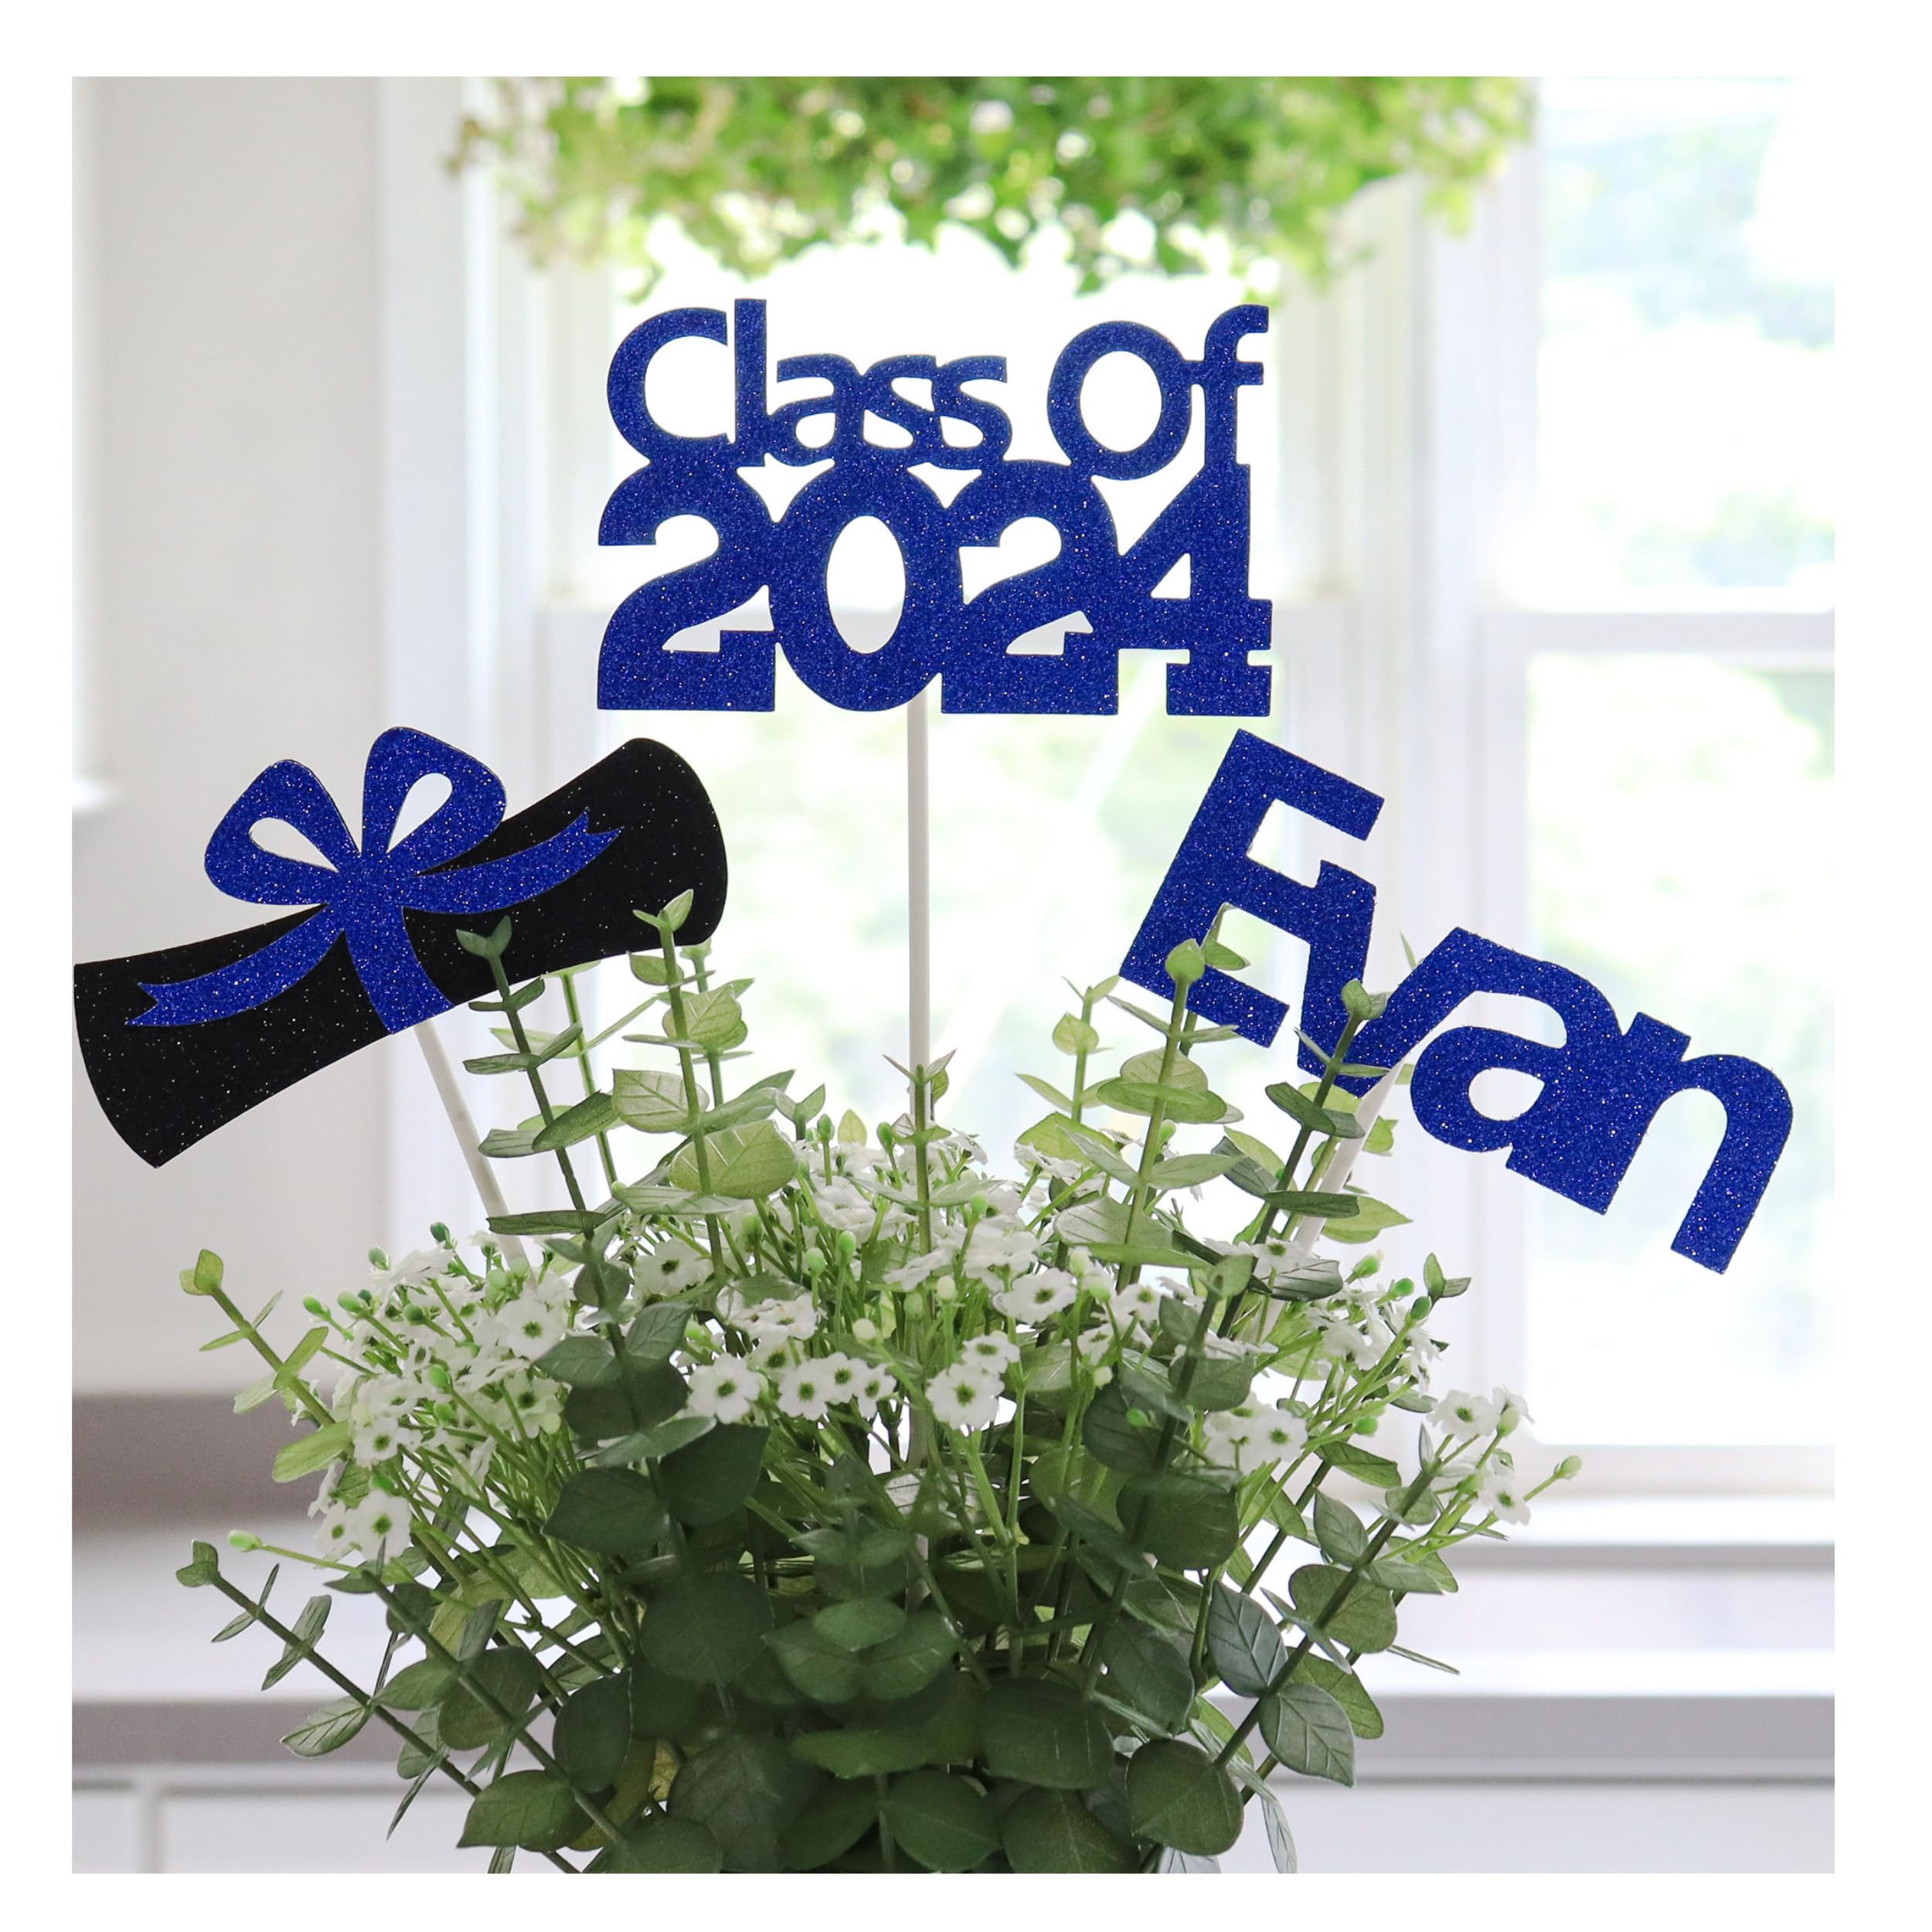 Graduation Table Centerpieces, Class of 2024 Table Centerpieces, Graduation Centerpieces, Graduation Decorations 2024, 3 in a Pack, by Zee Best Celebrations